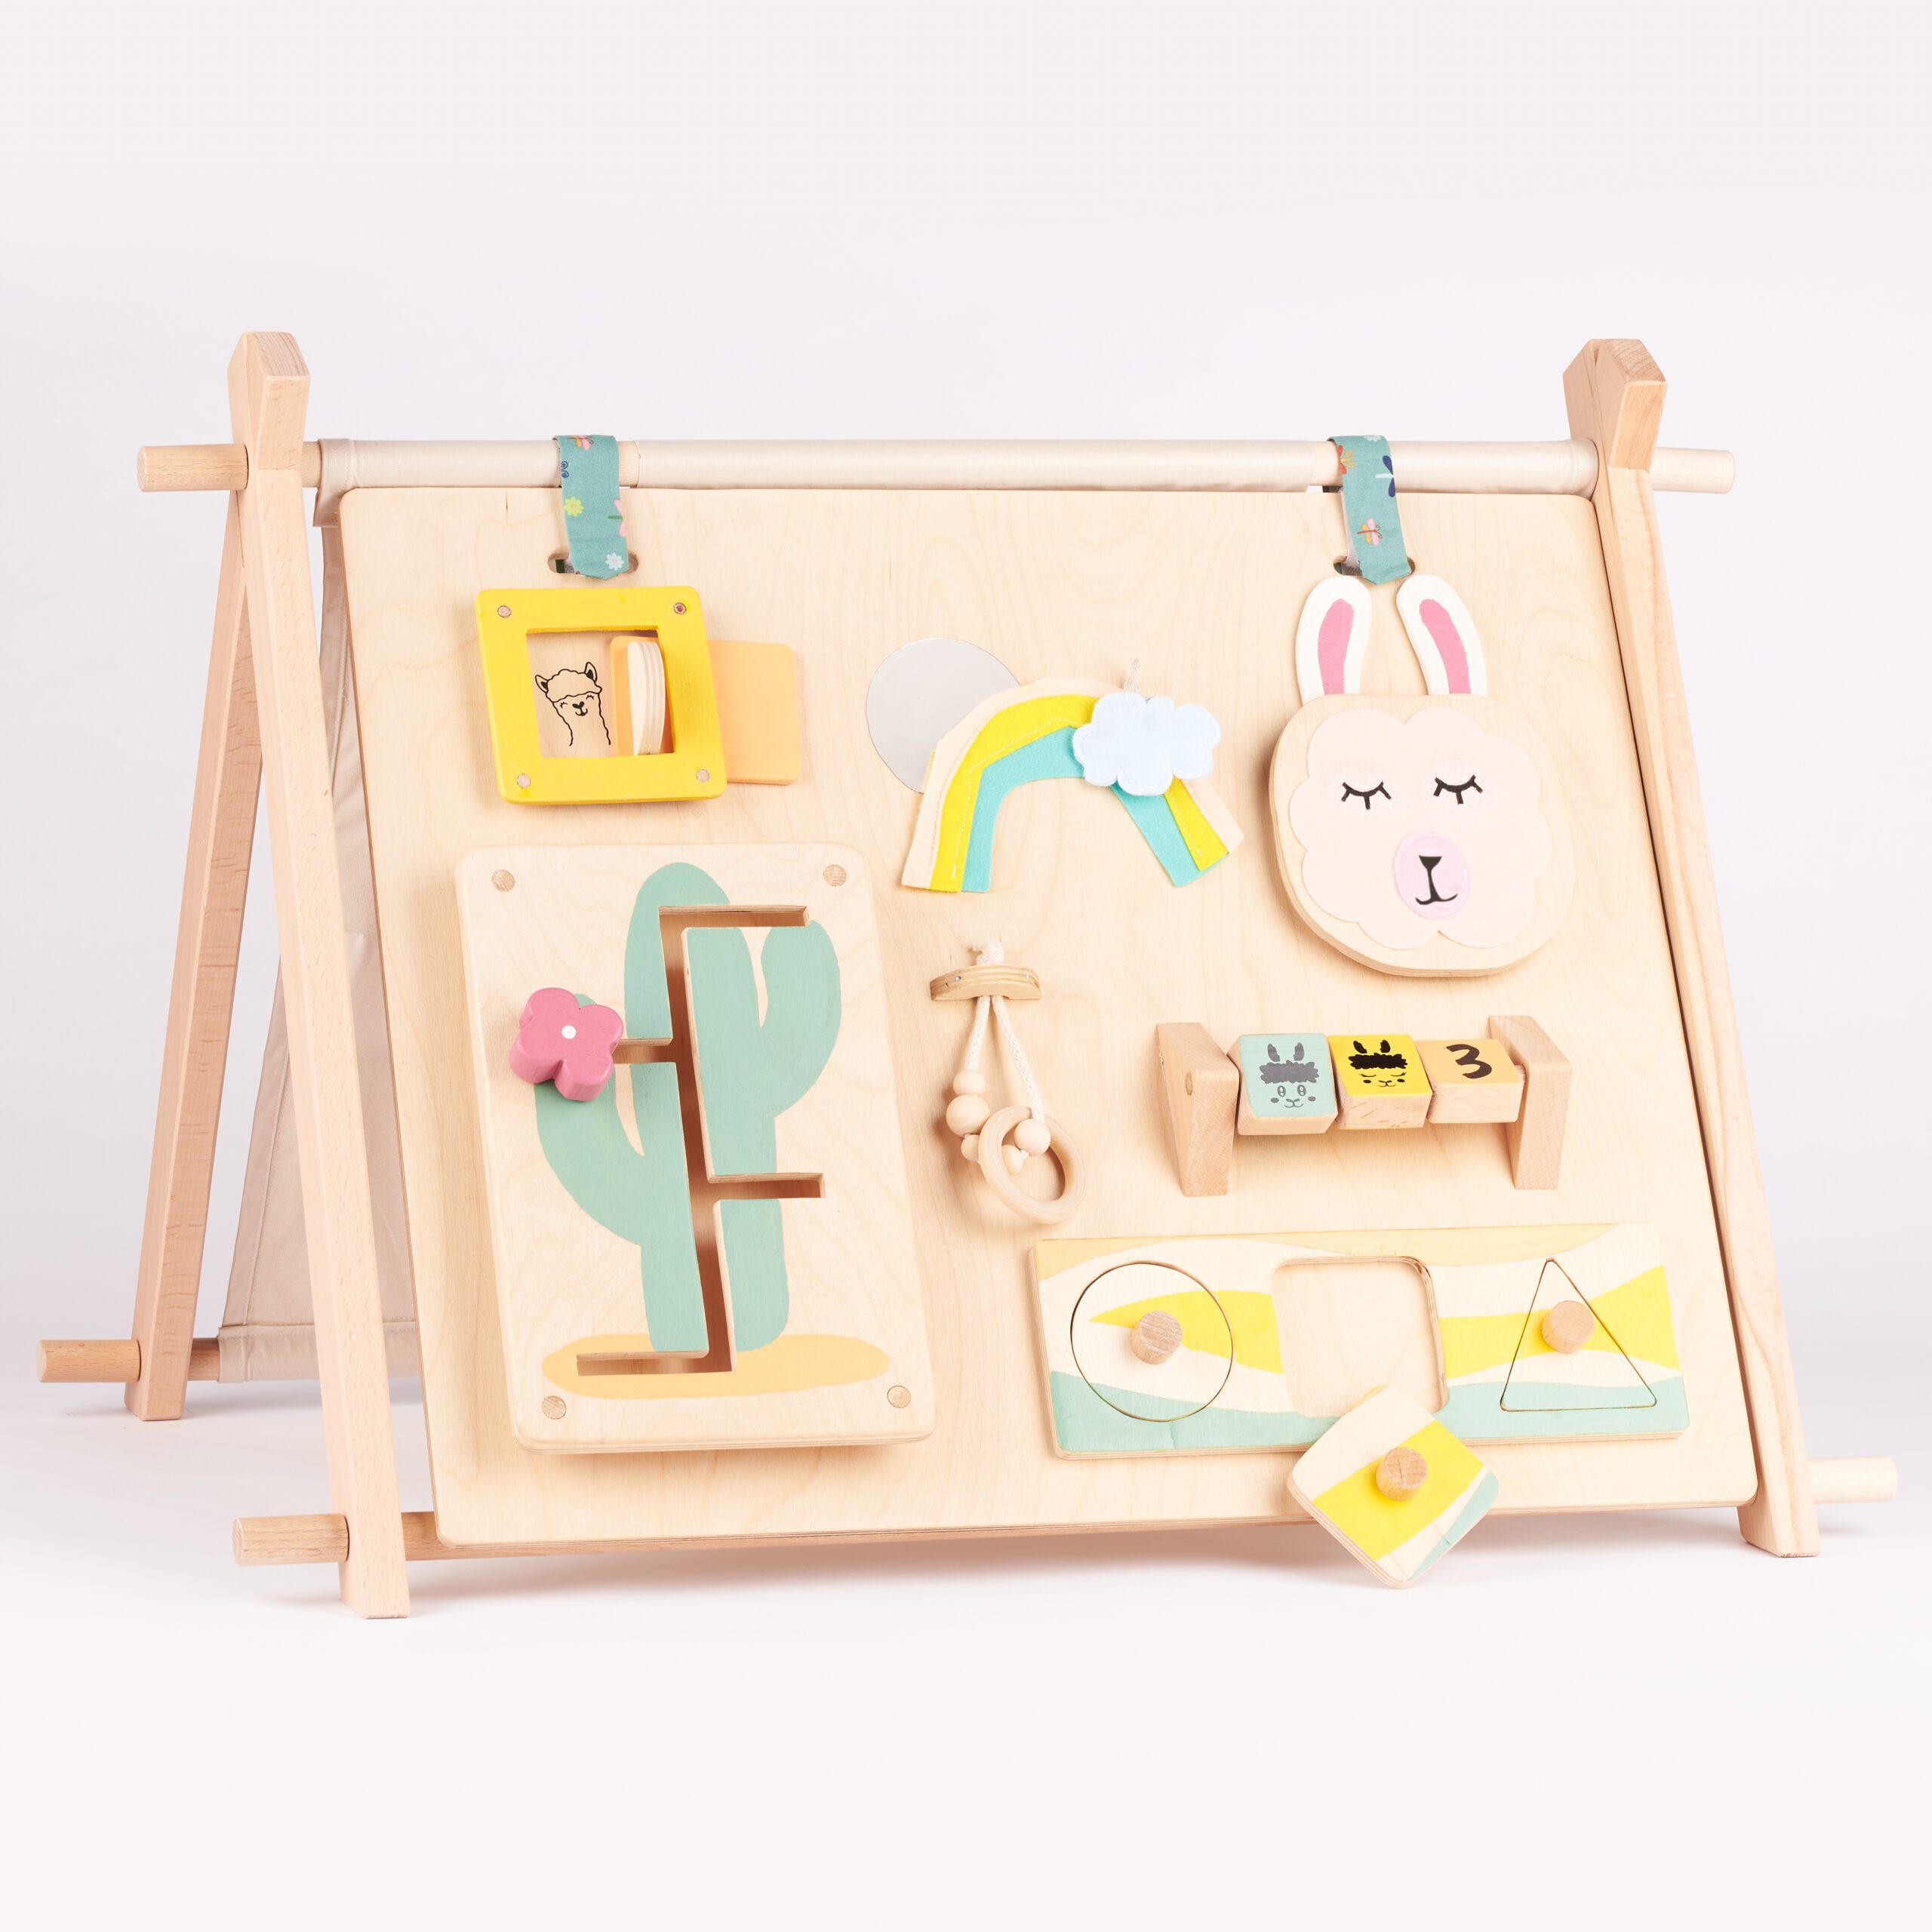 Montessori busy board: what it’s for, sensory activities and buying guide